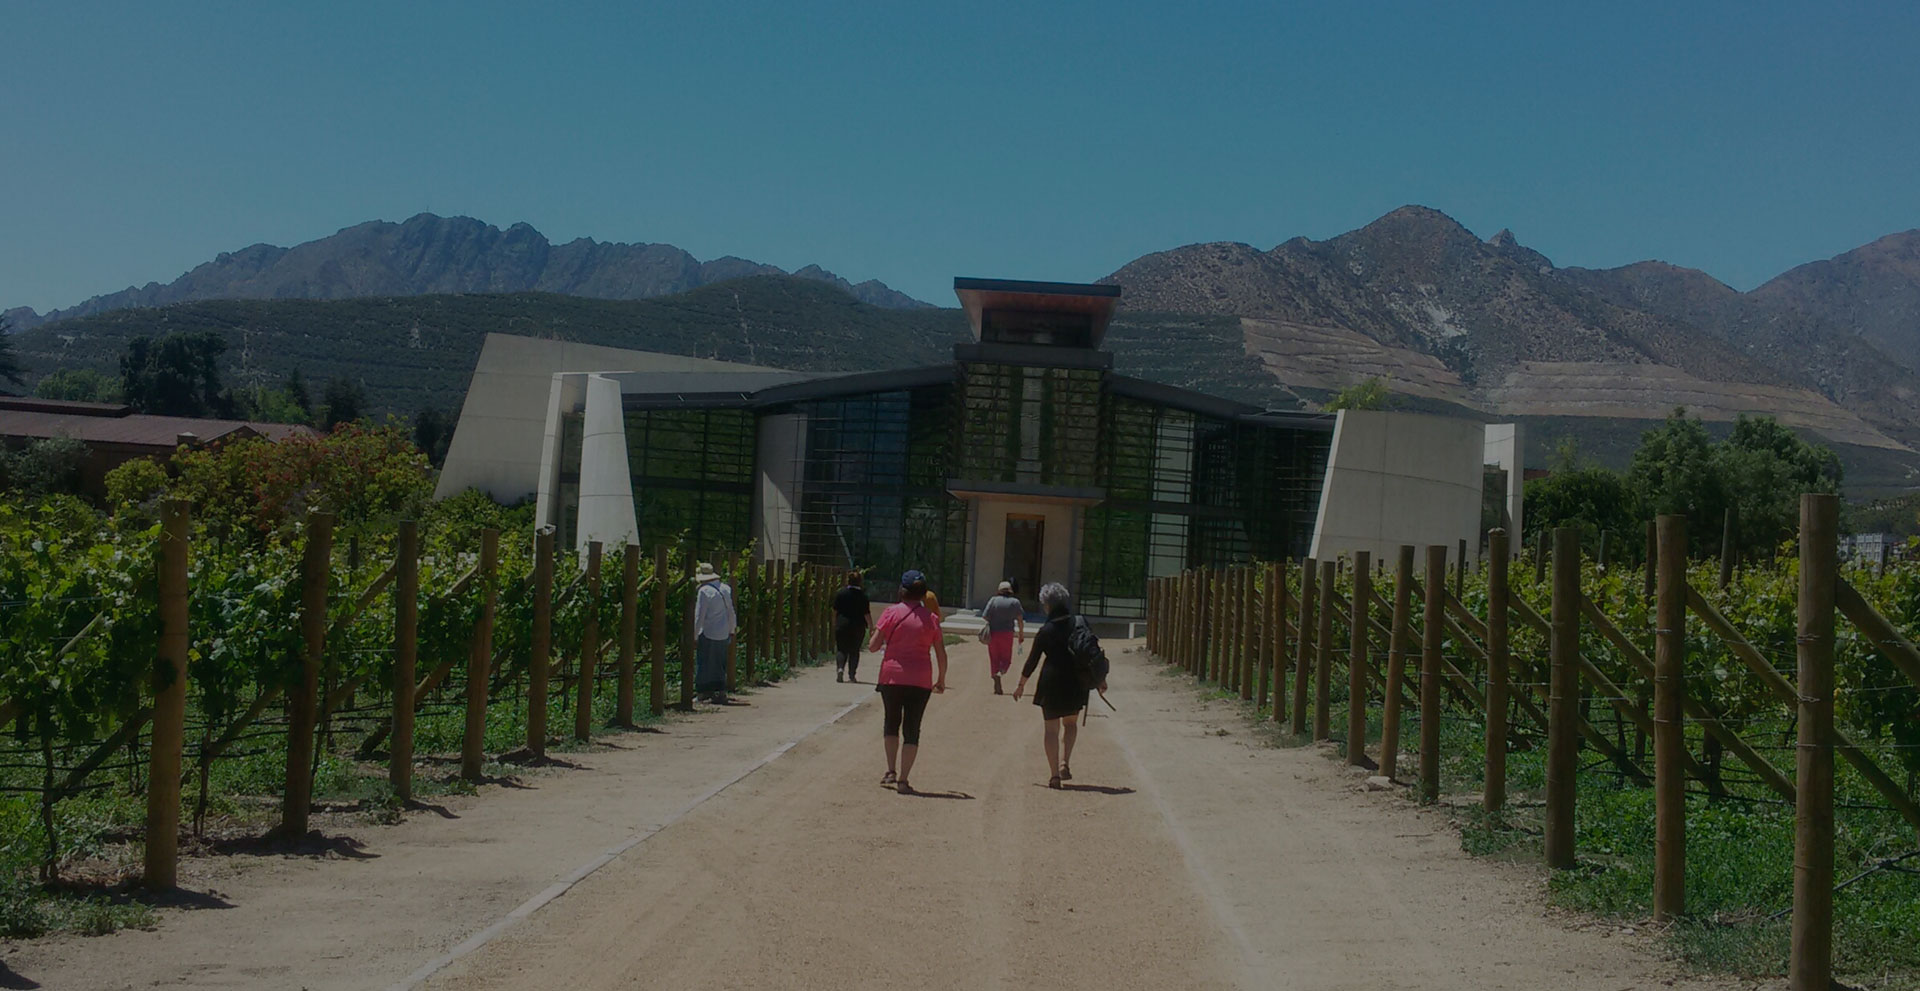 Women wine tours in Chile